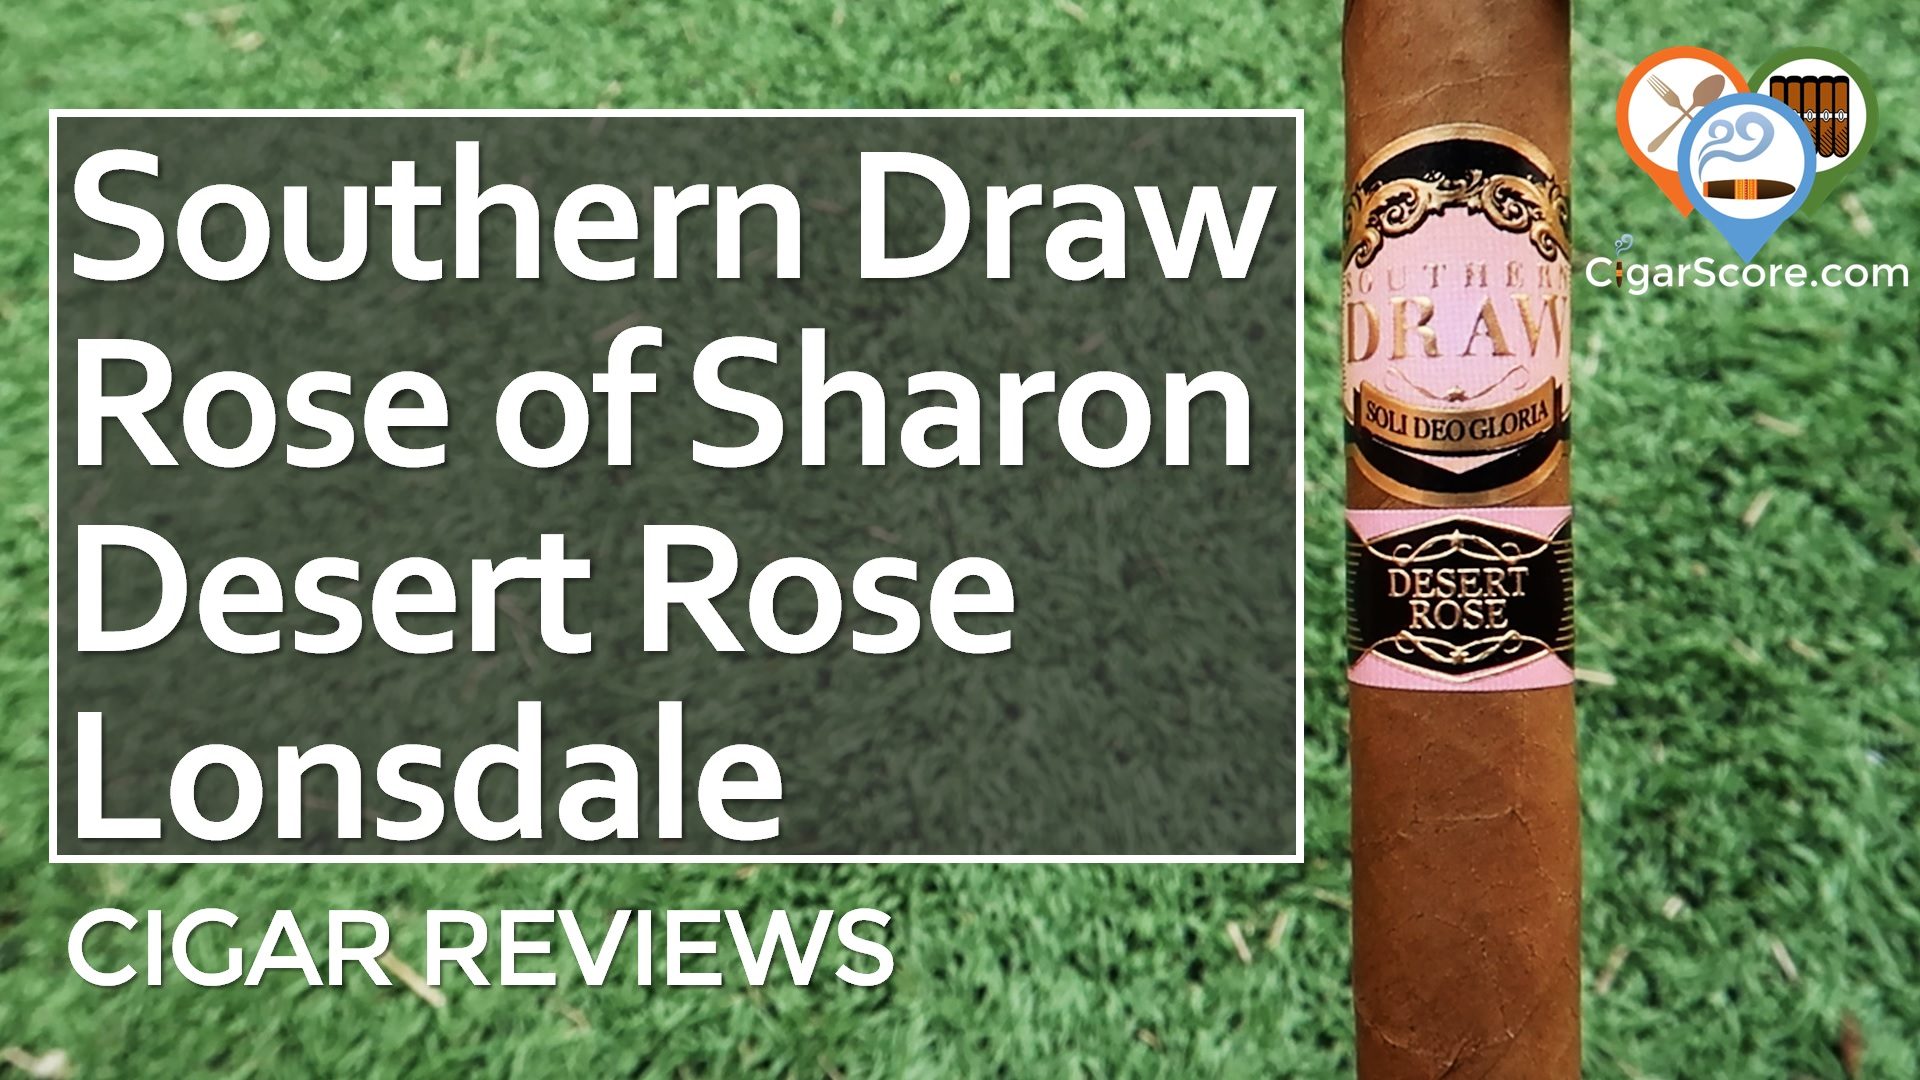 Cigar Review - Southern Draw Rose of Sharon Desert Rose Lonsdale